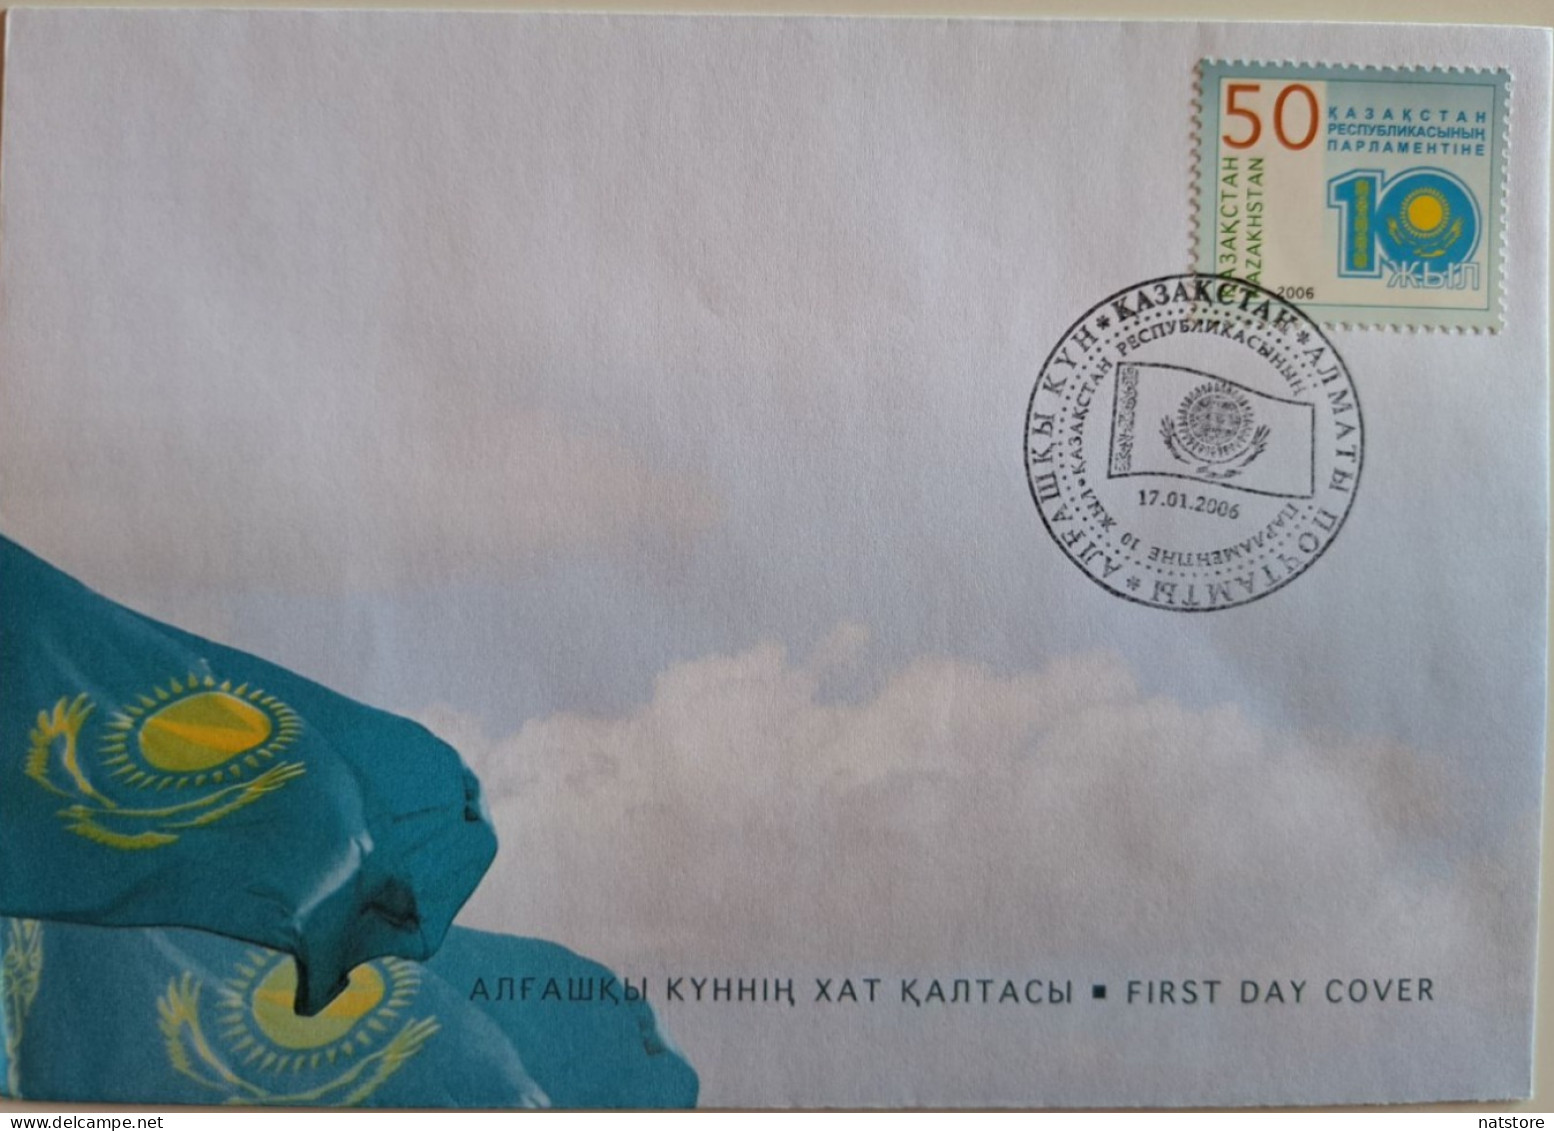 2006..KAZAKHSTAN...FDC WITH  STAMP...NEW..The 10th Anniversary Of Parliament Of Republic Of Kazakhstan..RARE!!! - Sobres